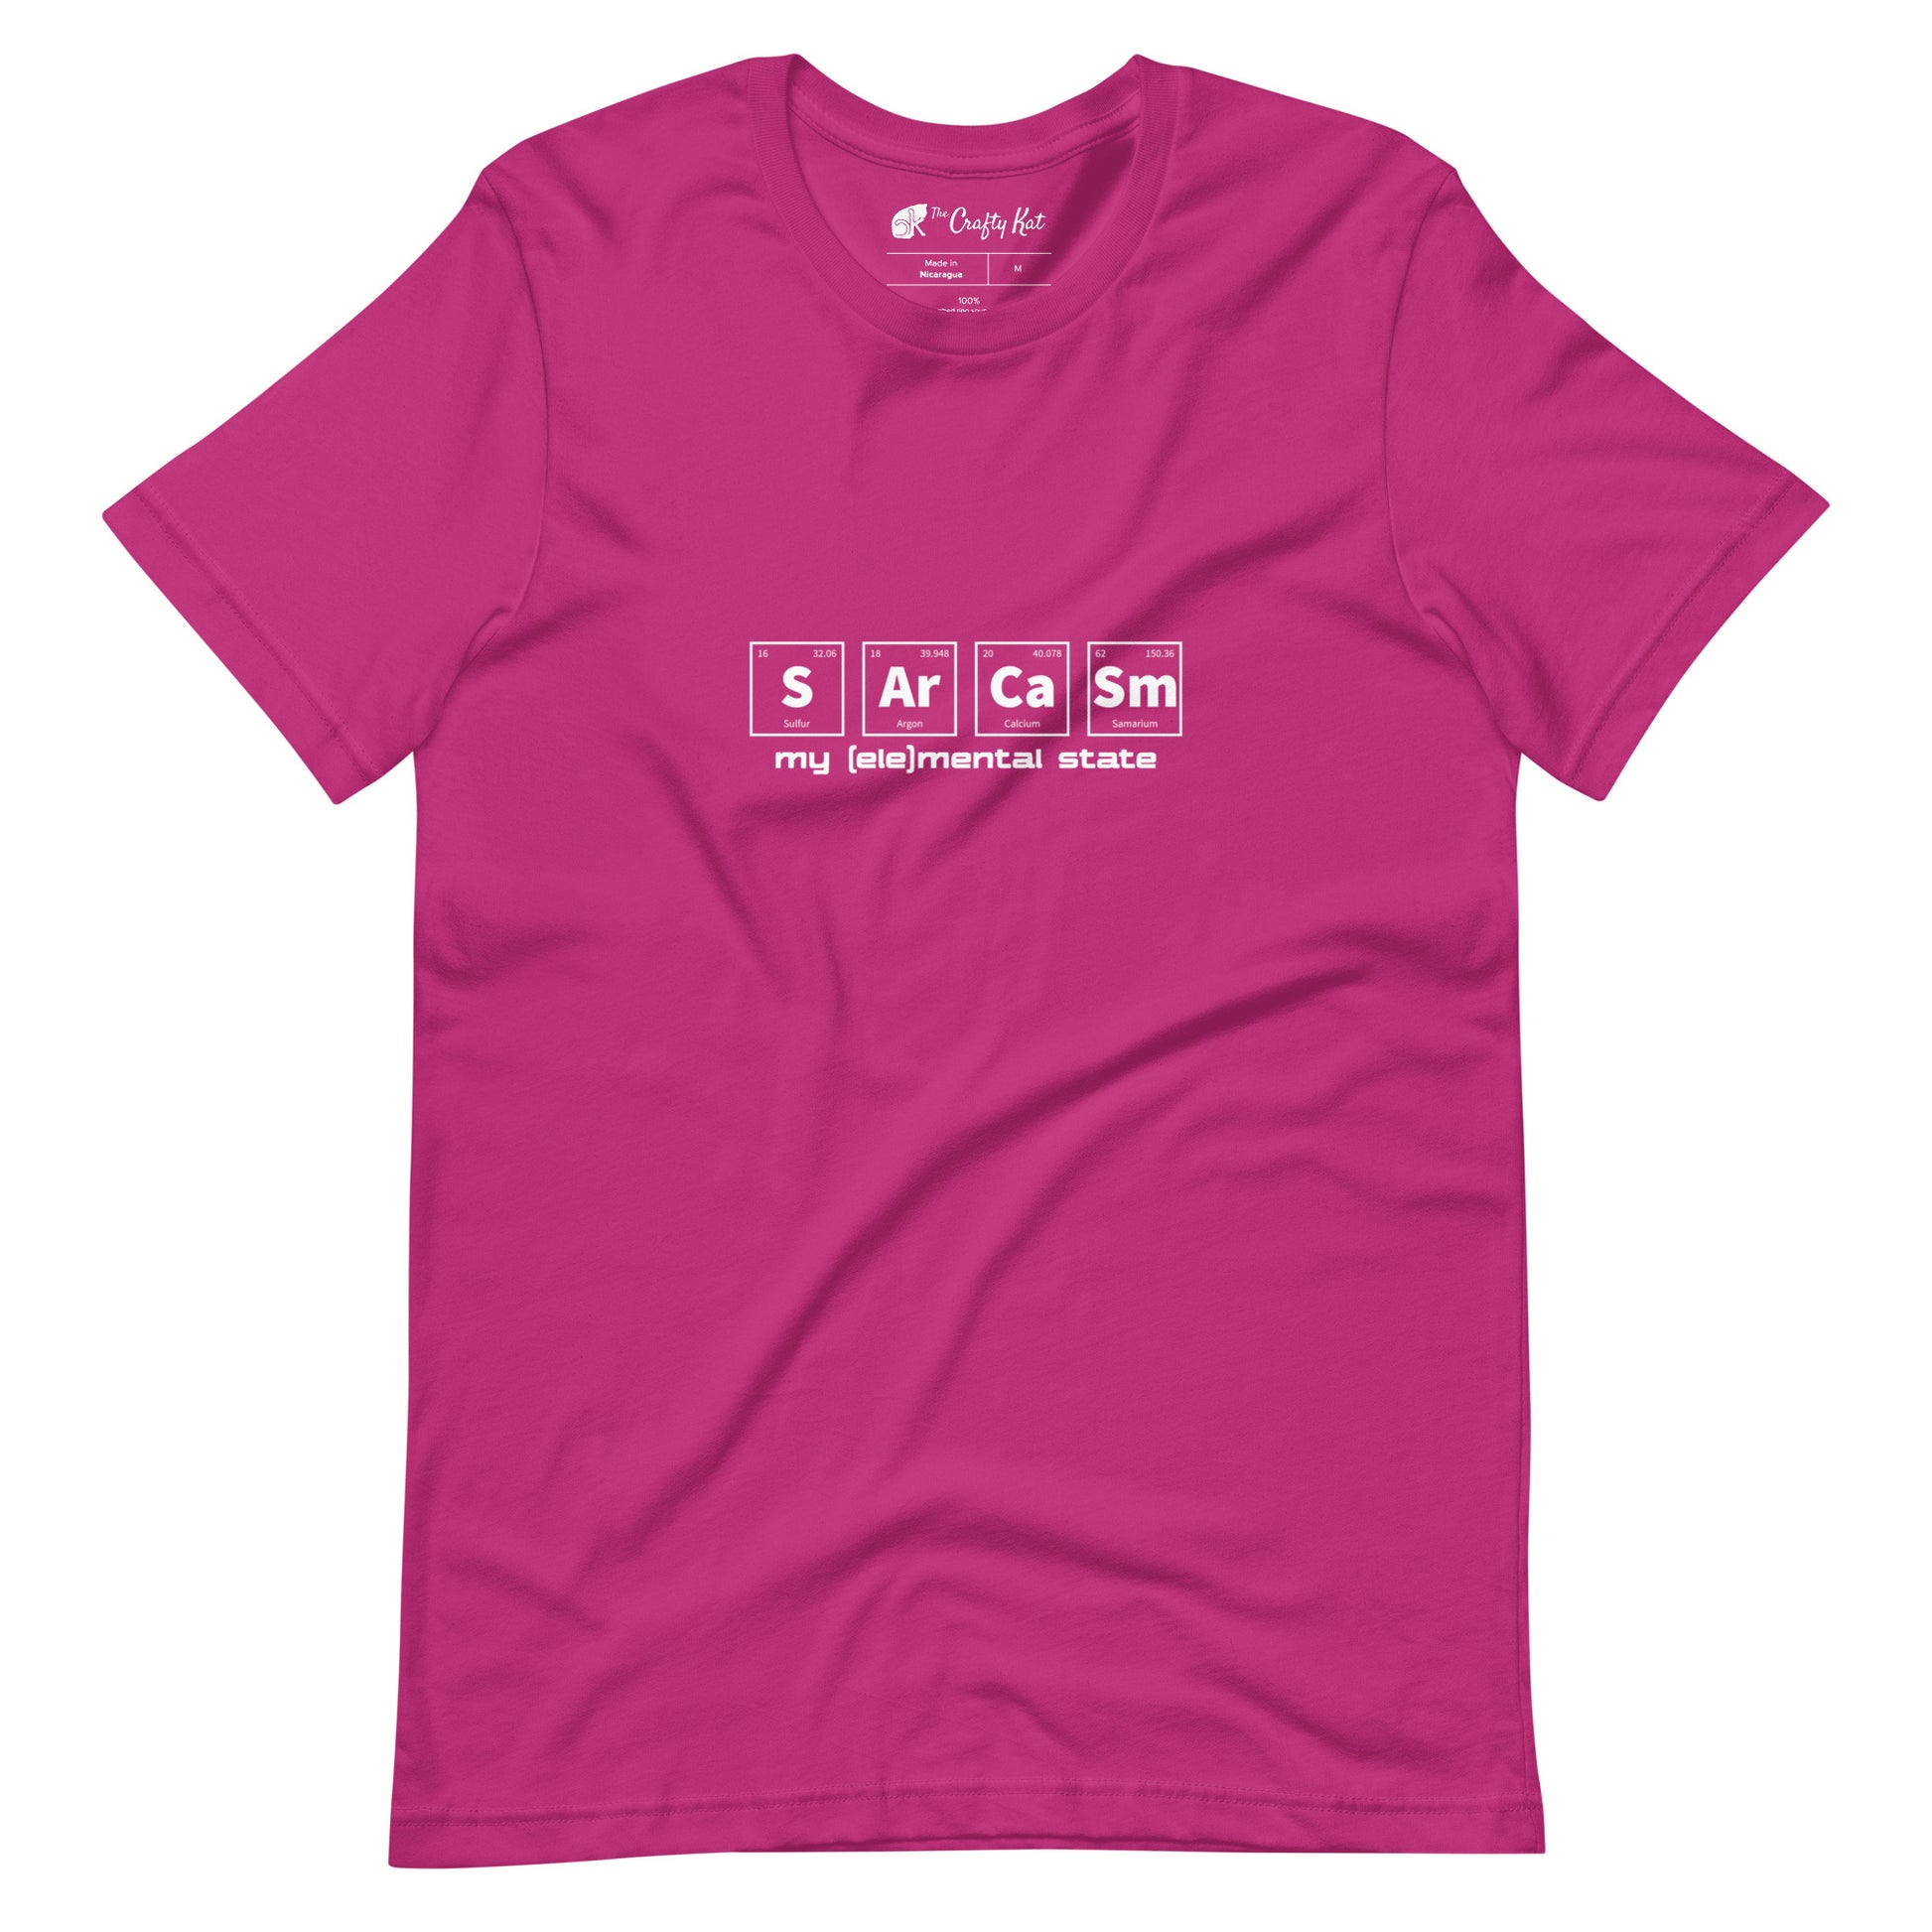 Berry (hot pink) t-shirt with graphic of periodic table of elements symbols for Sulfur (S), Argon (Ar), Calcium (Ca), and Samarium (Sm) and text "my (ele)mental state"